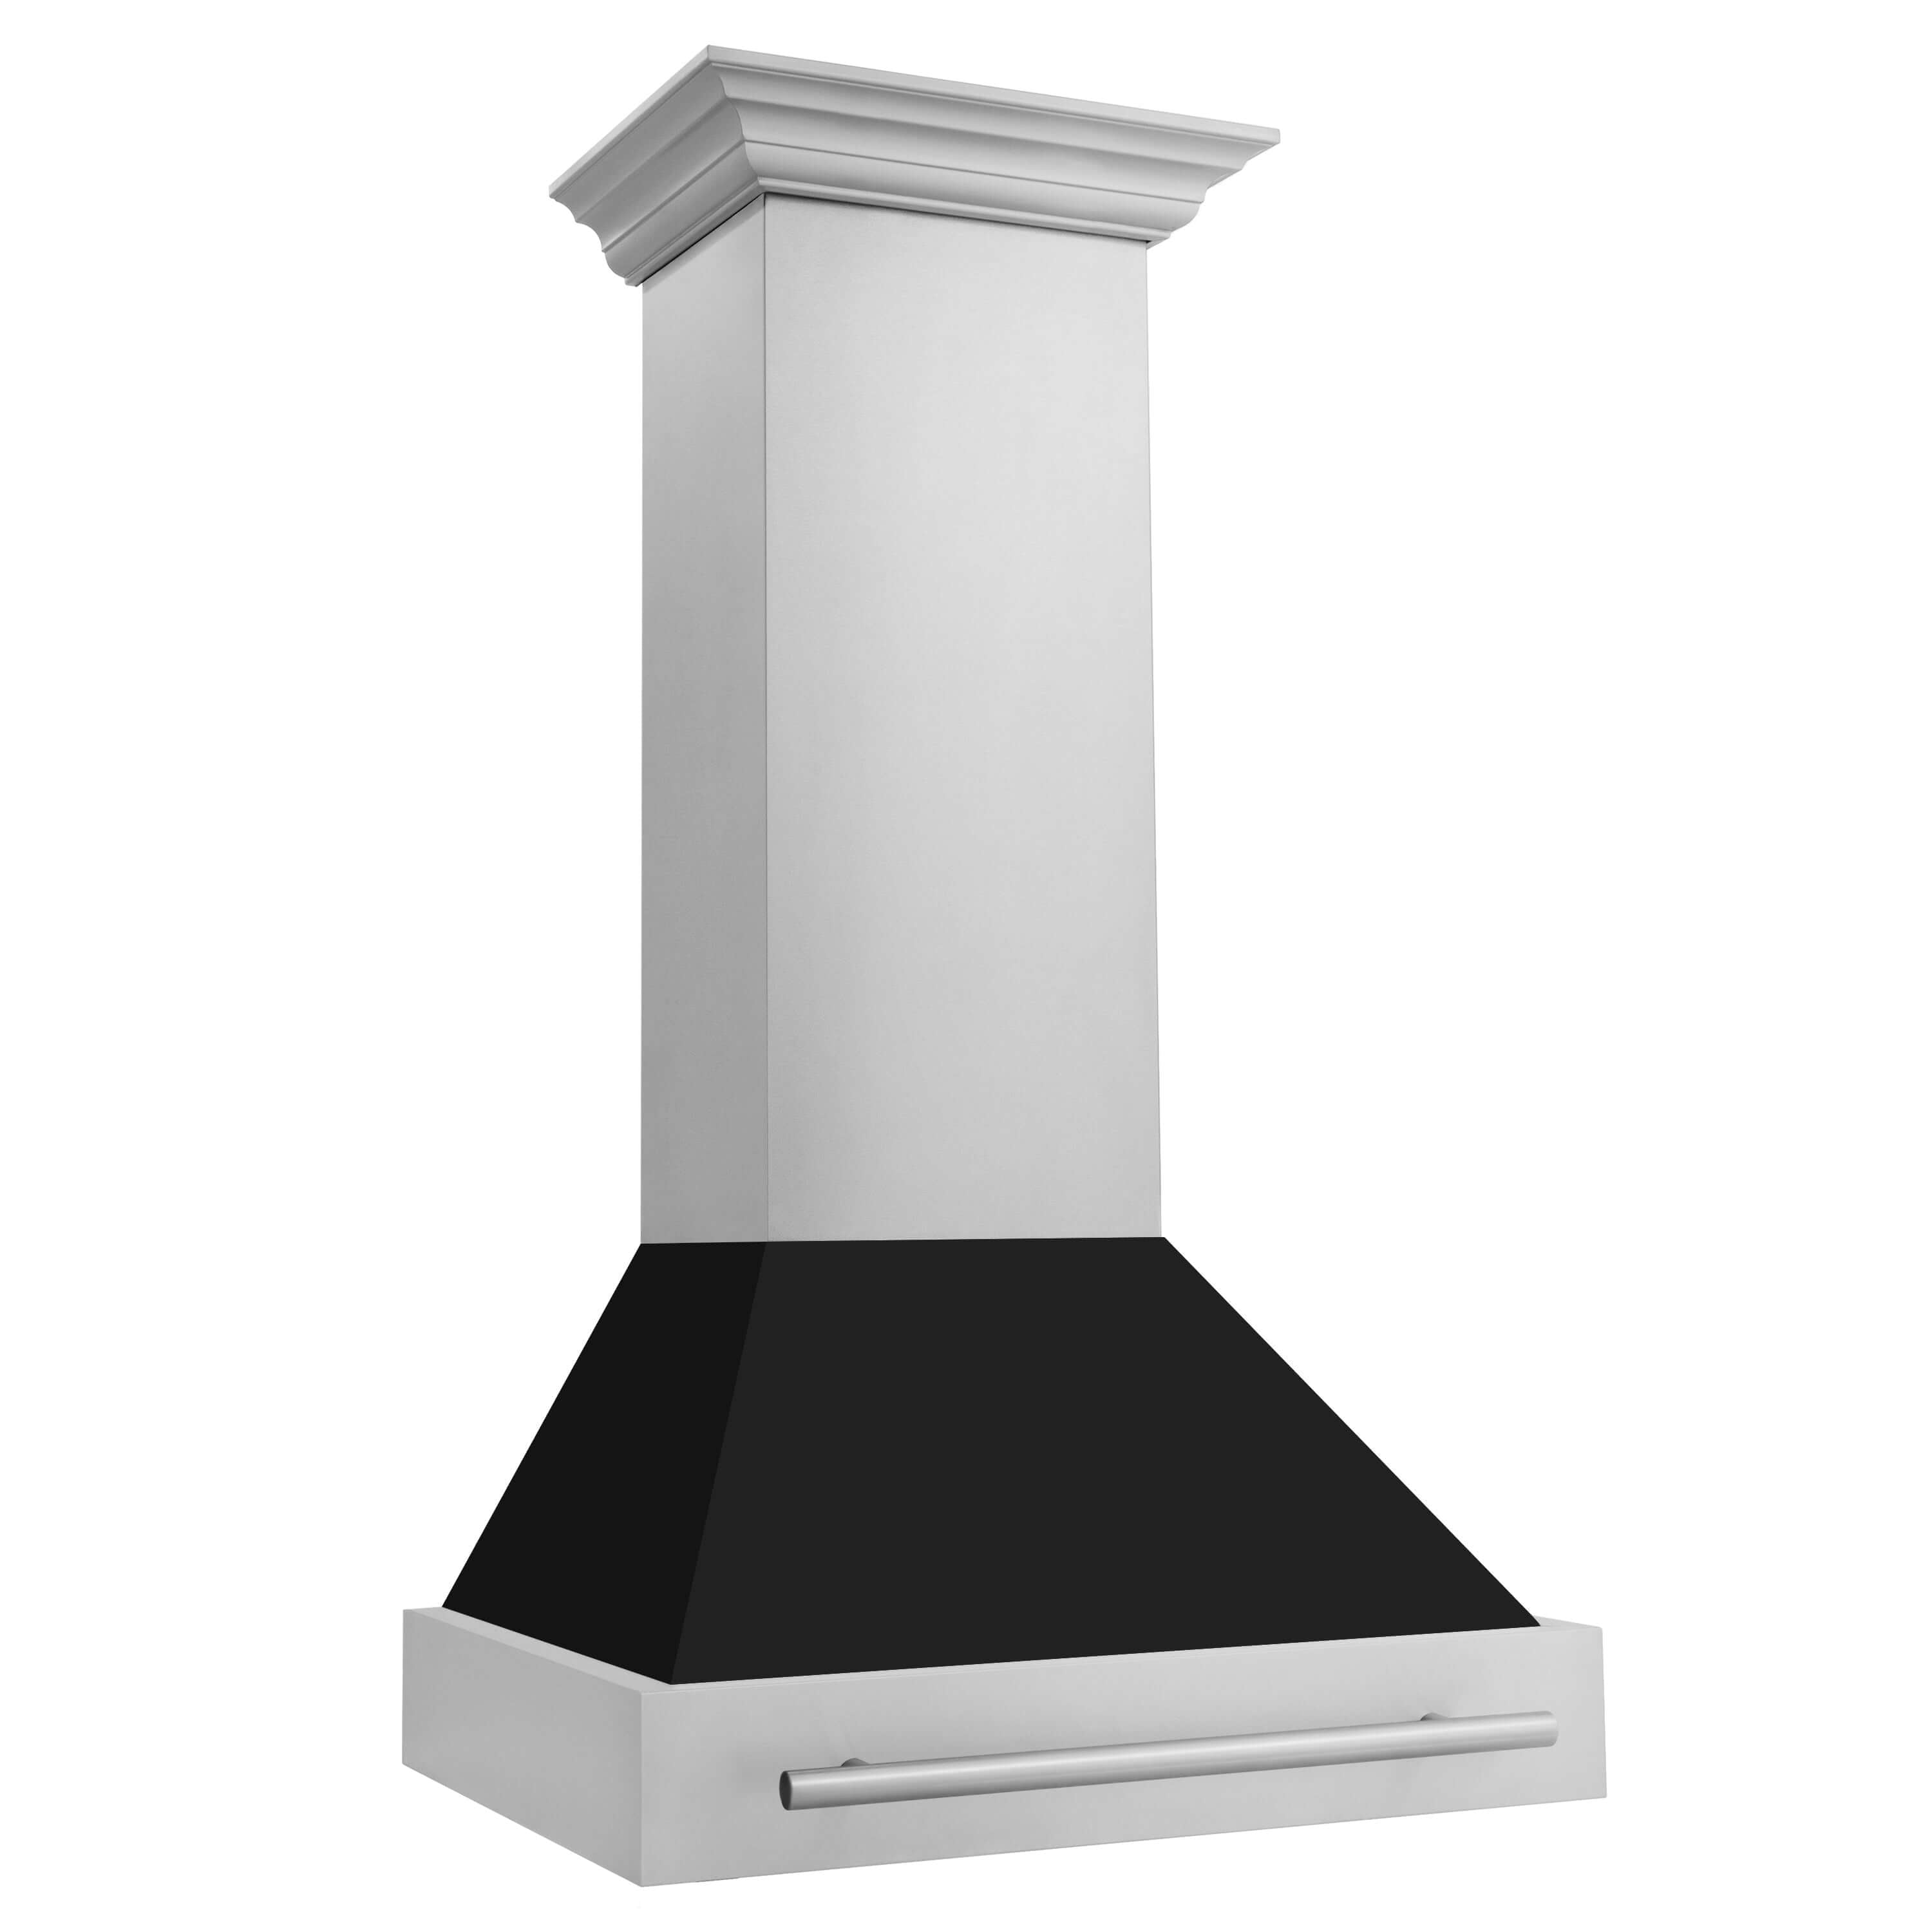 ZLINE 30 in. Stainless Steel Range Hood with Colored Shell Options and Stainless Steel Handle (8654STX-30) Black Matte side.